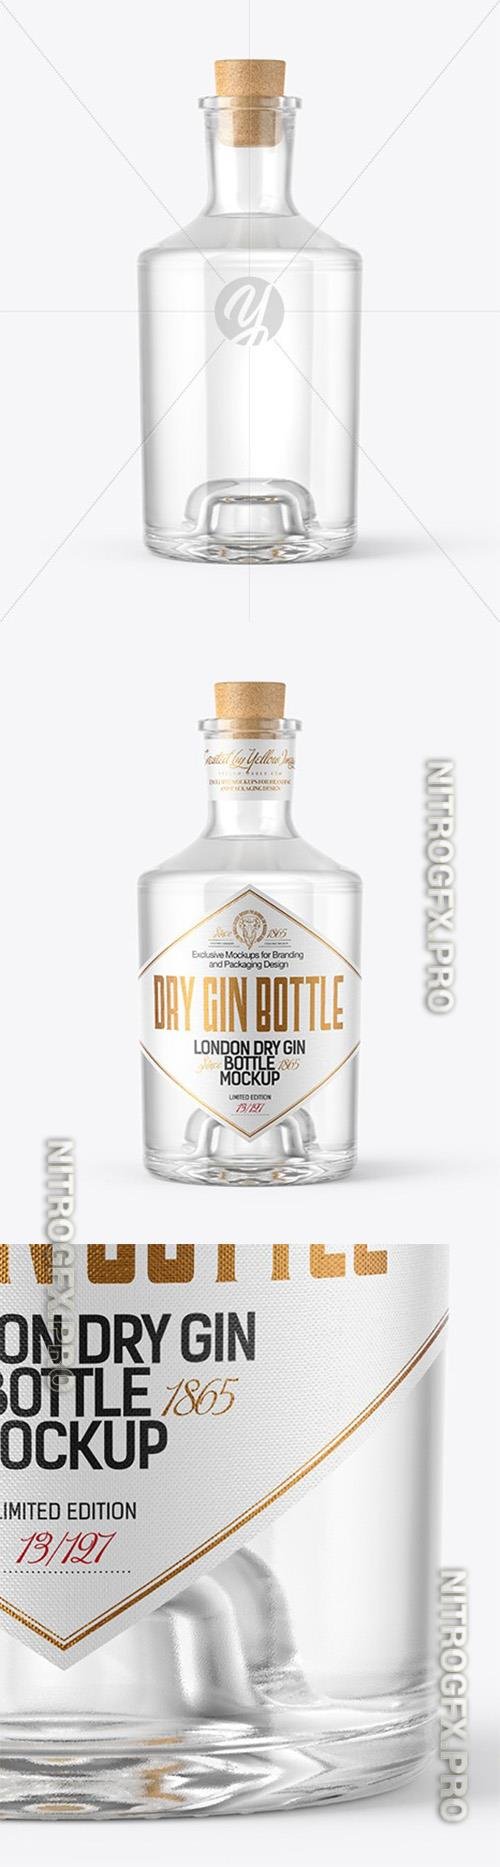 Dry Gin Bottle with Cork Mockup 45980